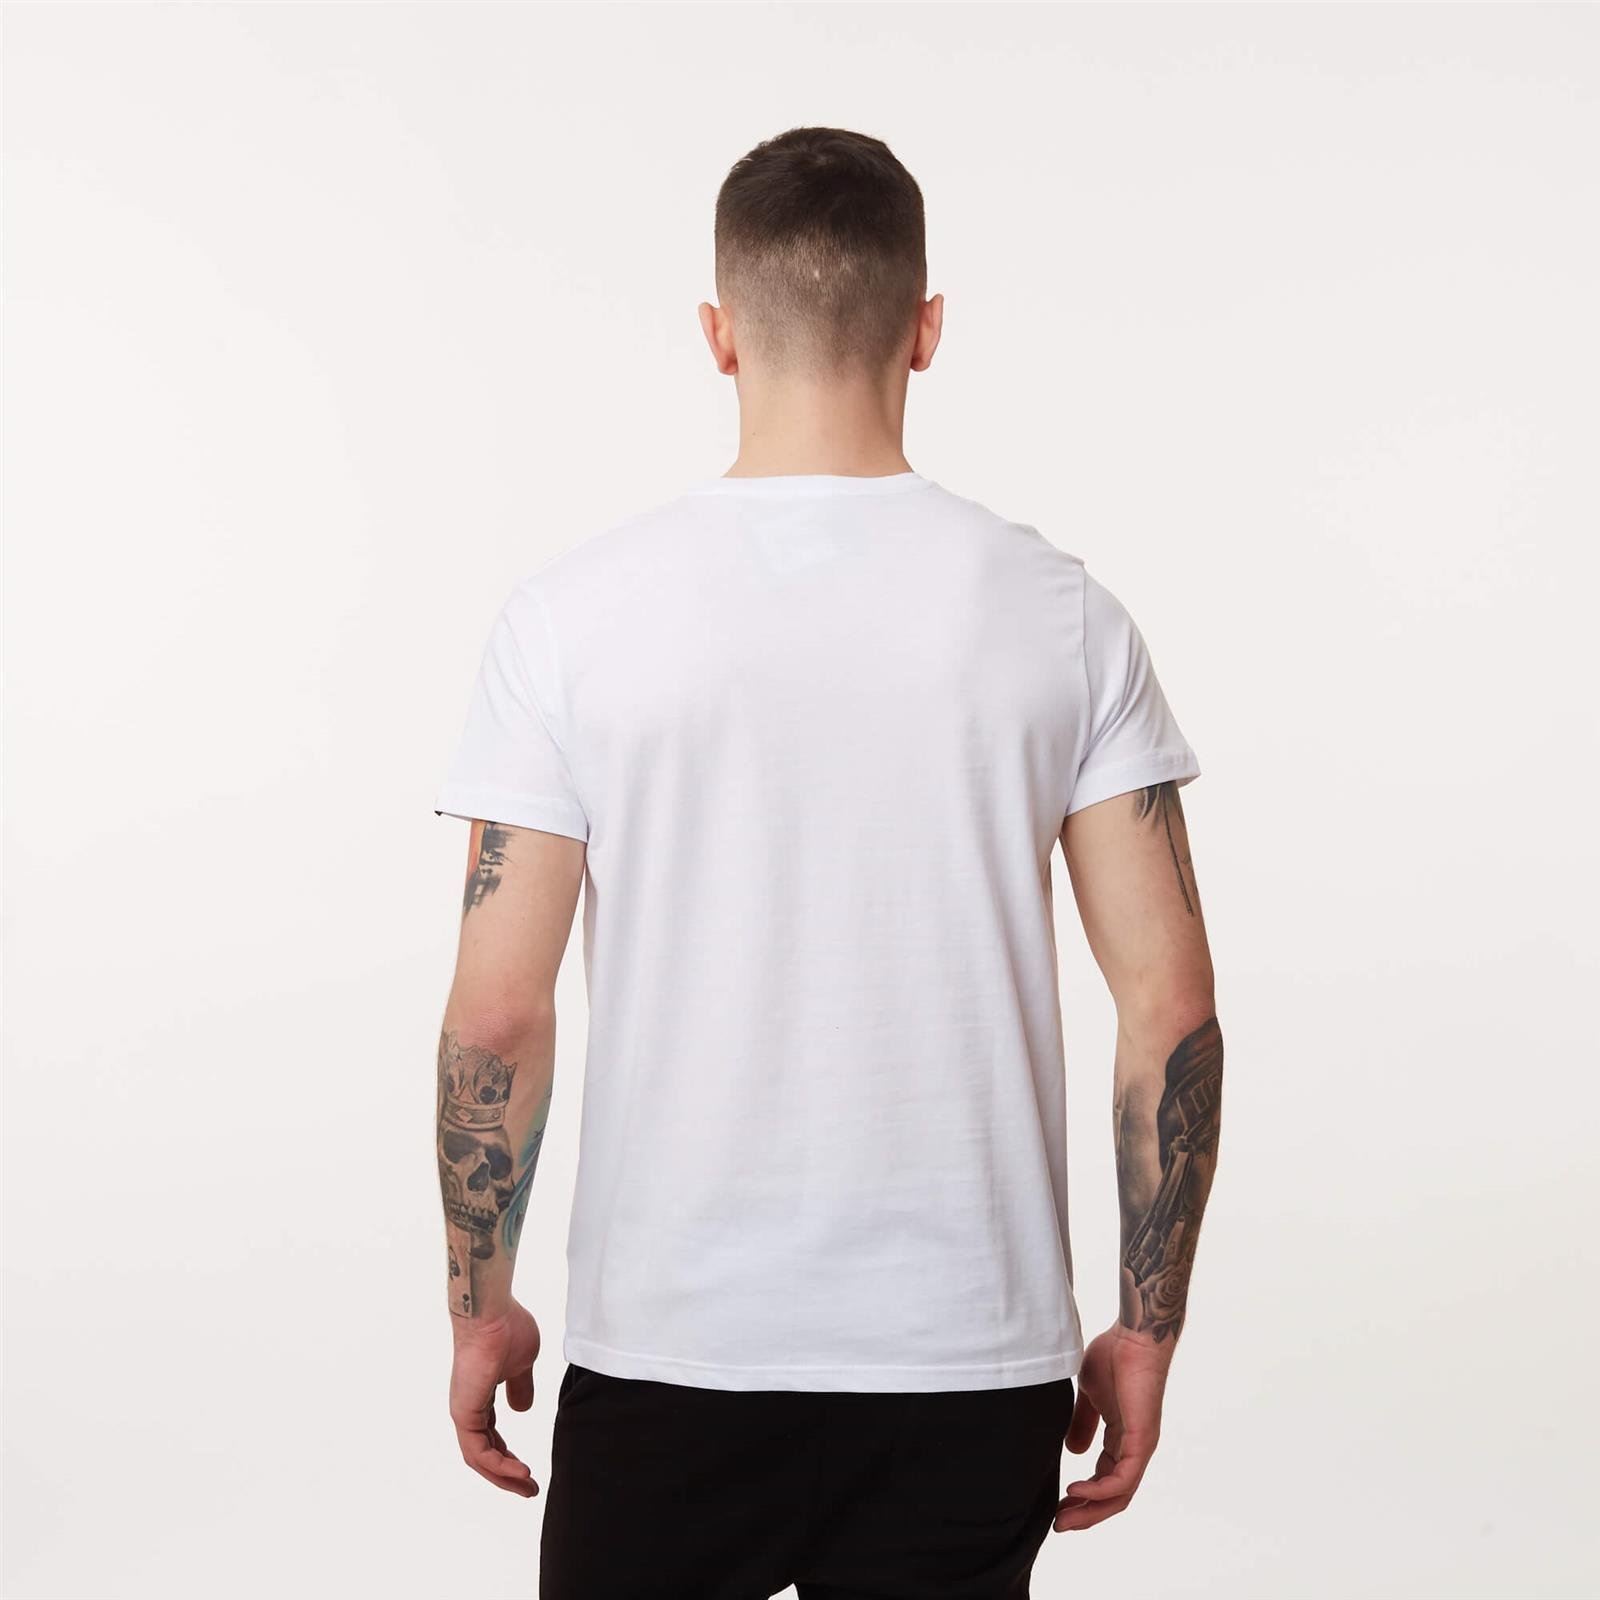 \\ WHITE \\ #Brands Industries BASIC Alpha brands clothing Ellesse \\ Industries #Recommended \\ T-SHIRT Alpha T-shirts \\ Men | Men clothing Brands Men\'s \\